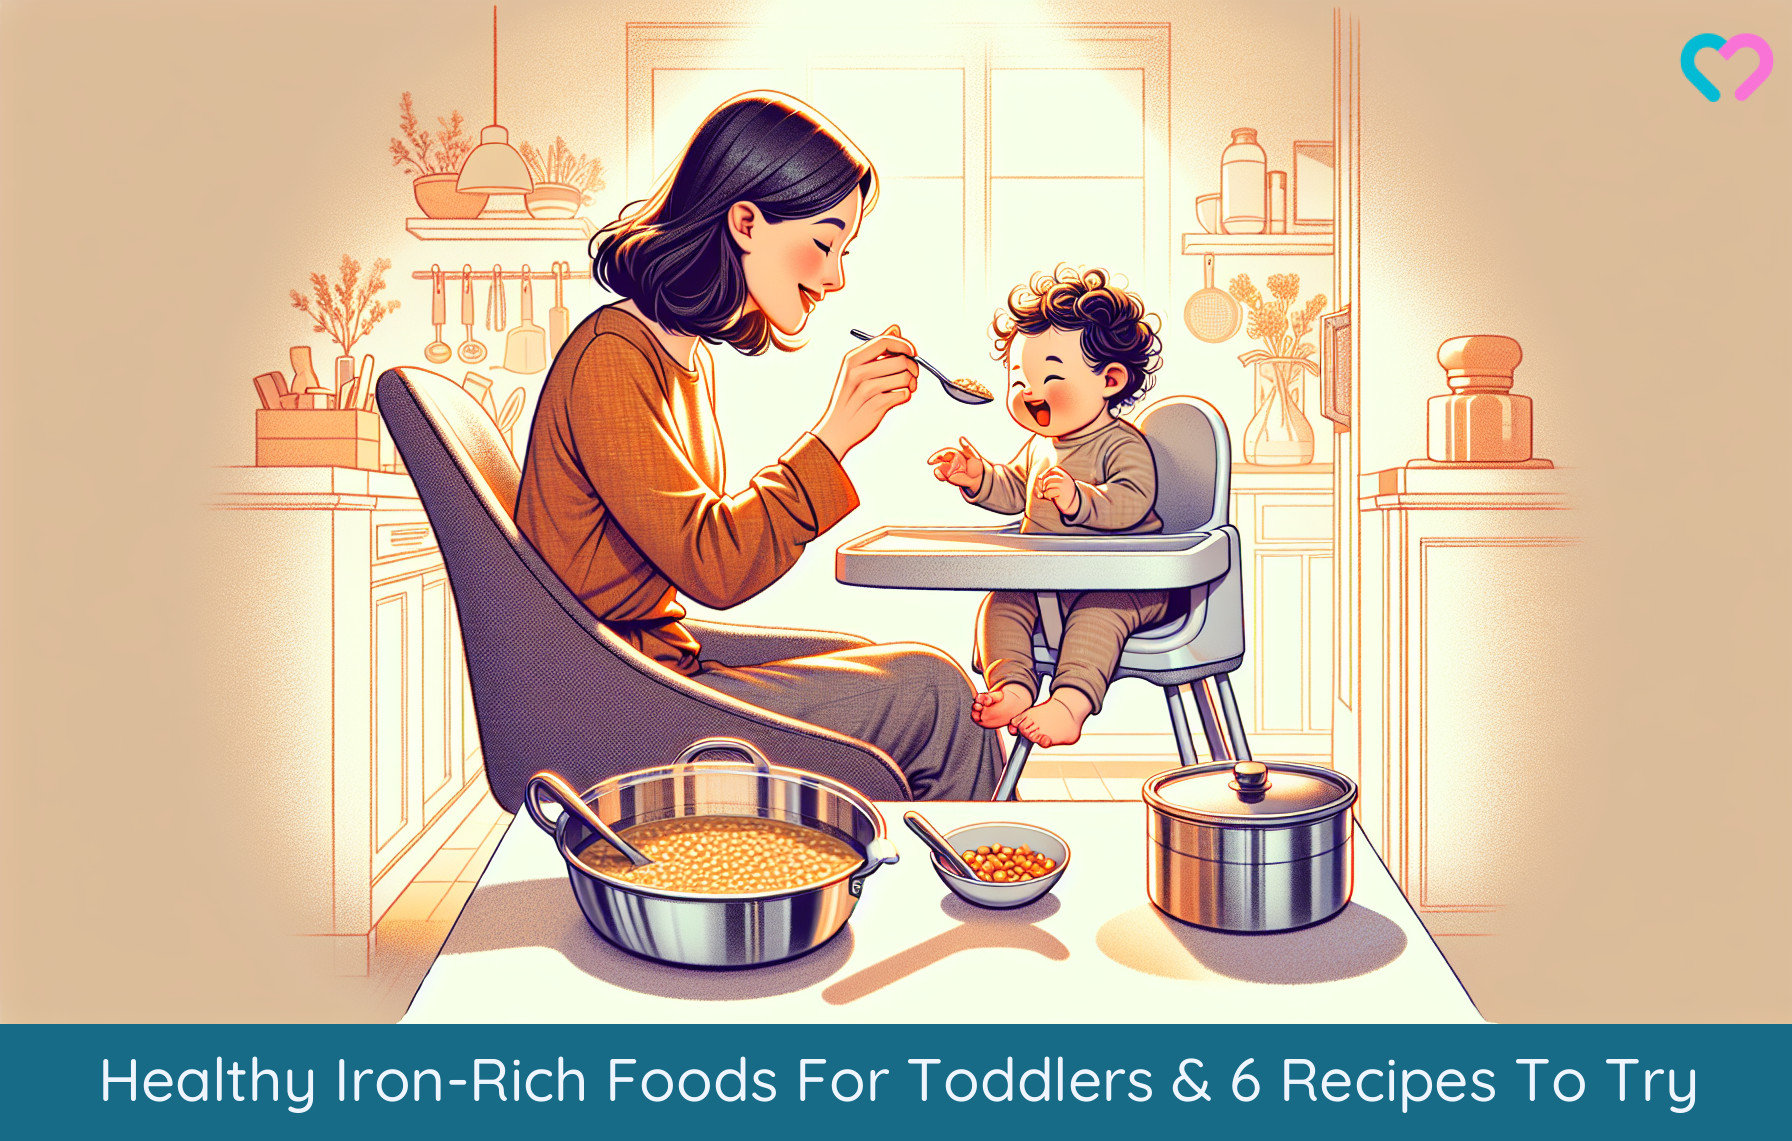 iron rich foods for toddlers_illustration